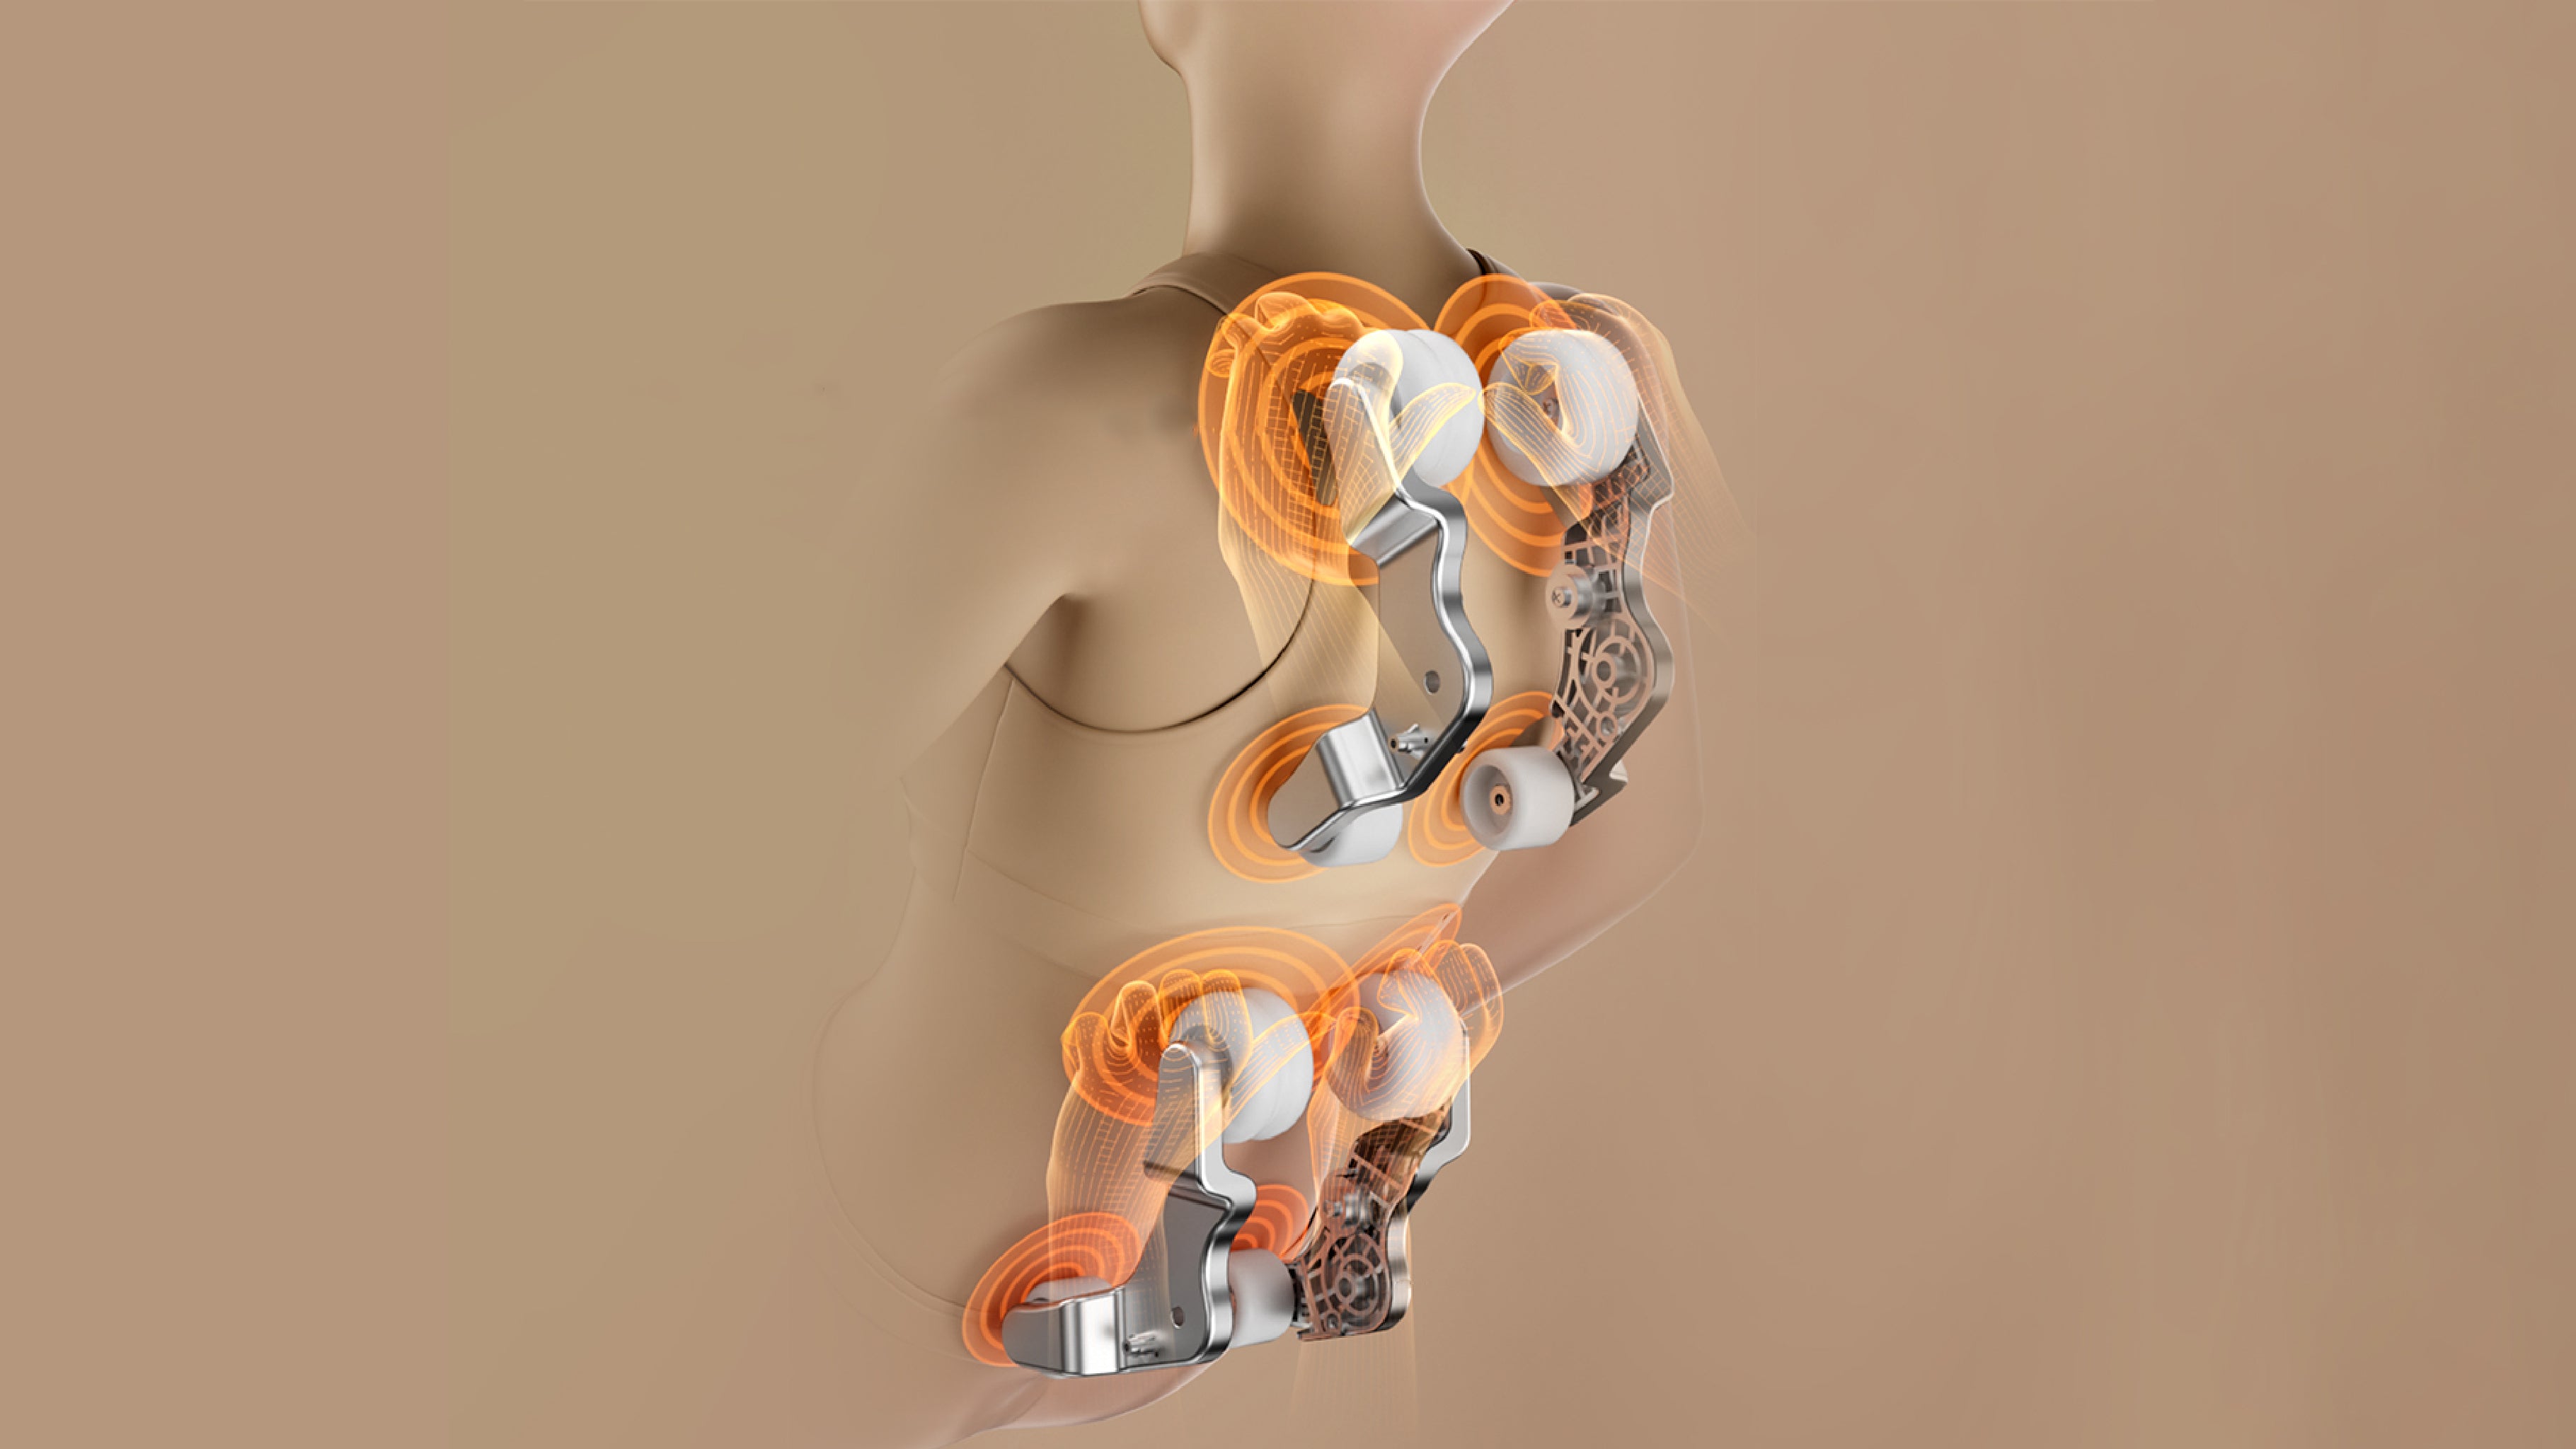 Picture of 4D dual mechanism massage rollers in human body